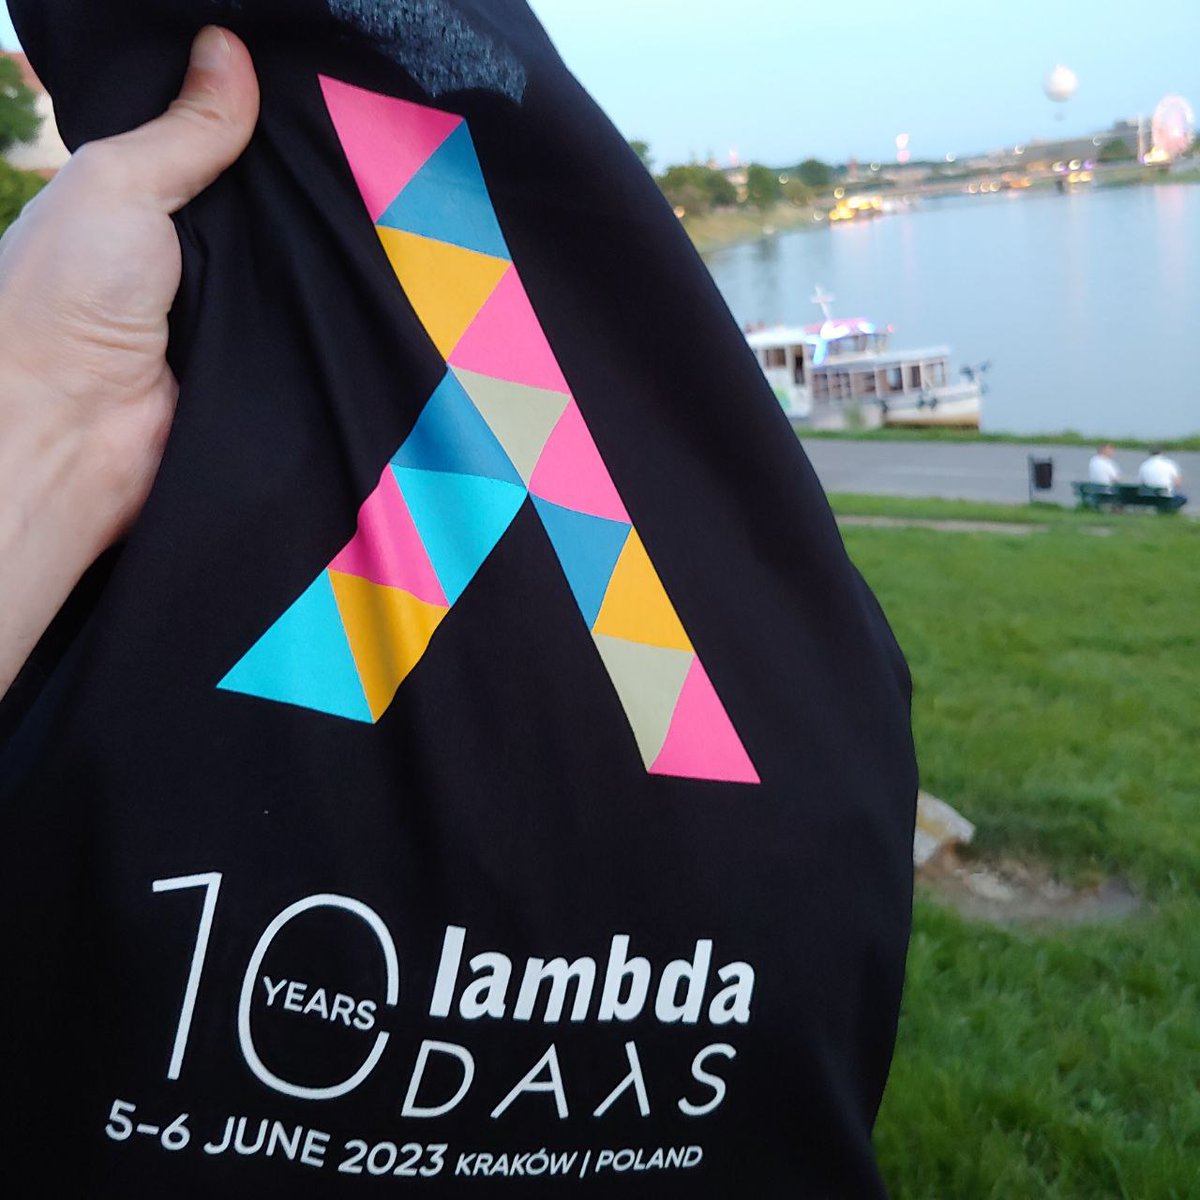 Come meet us at @LambdaDays tomorrow (June 5th). You'll find me and other amazing people and devs in #Krakow ready to welcome you!